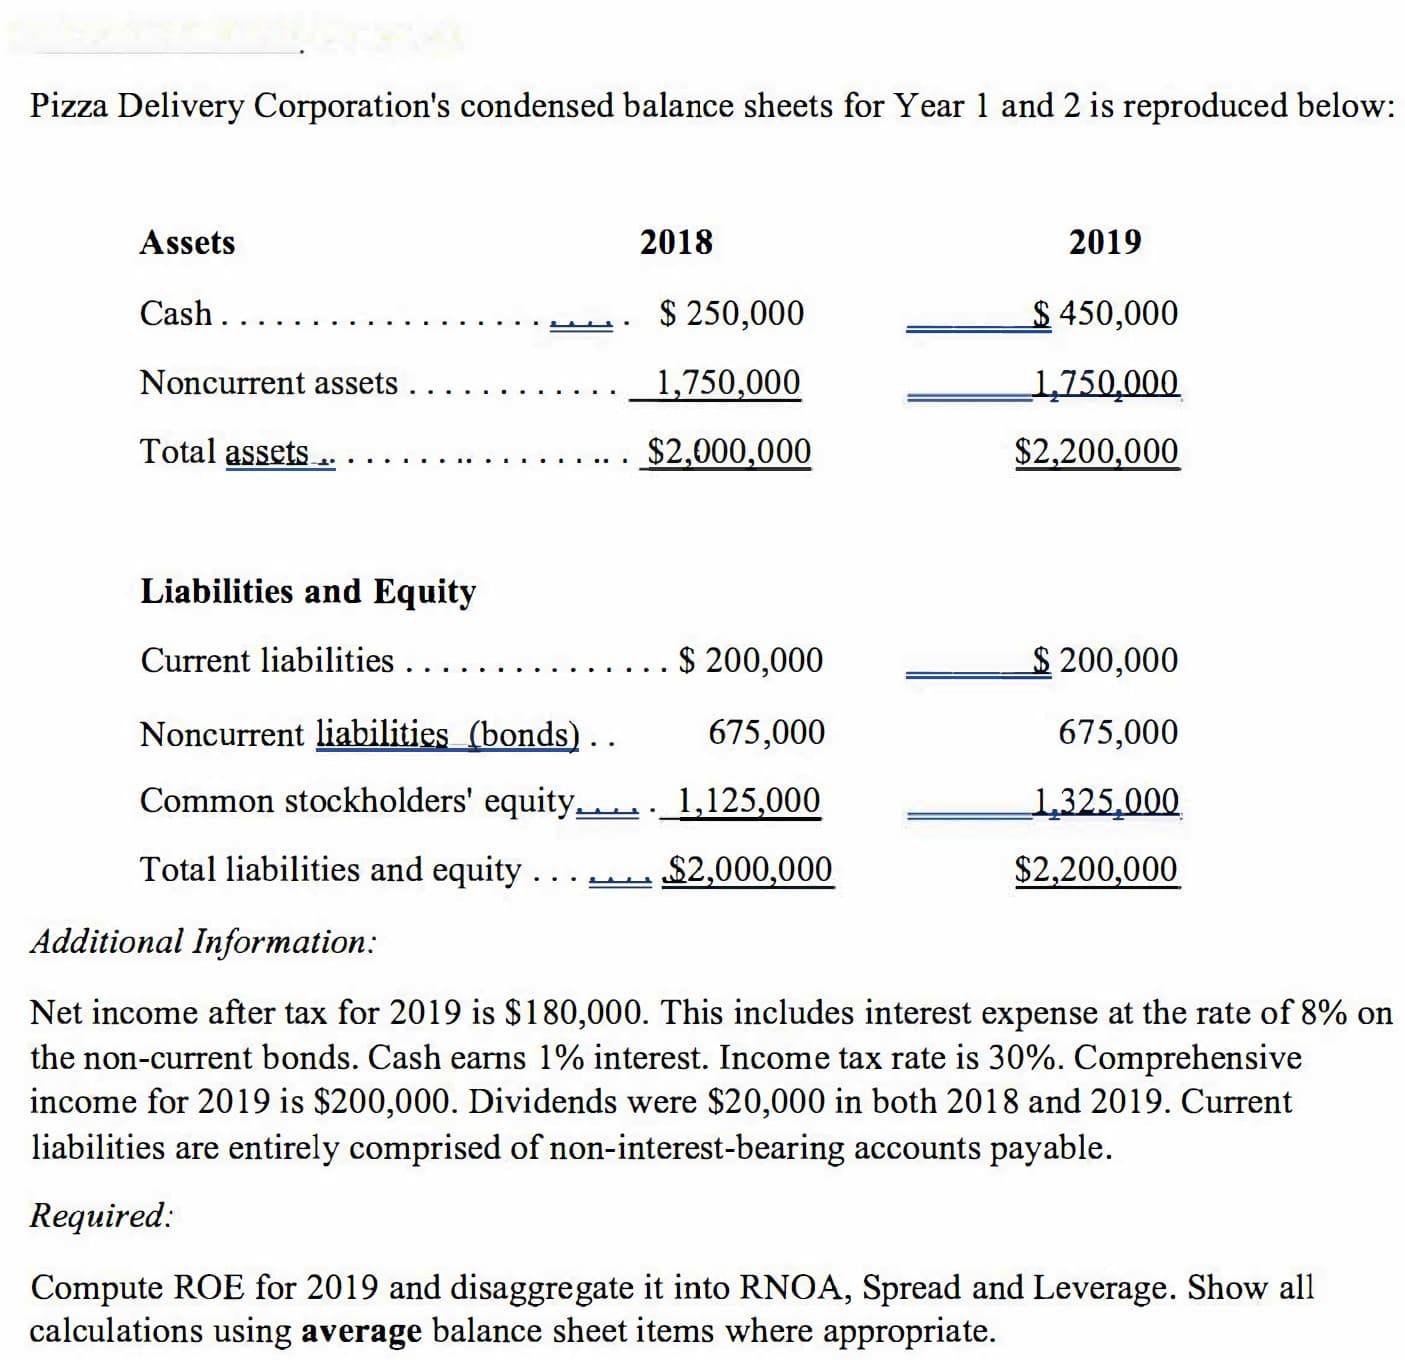 Pizza Delivery Corporation's condensed balance sheets for Year 1 and 2 is reproduced below
Assets
2018
2019
Cash.
$ 250,000
$ 450,000
Noncurrent assets
1,750,000
1,750,000
Total assets..
$2,000,000
$2,200,000
